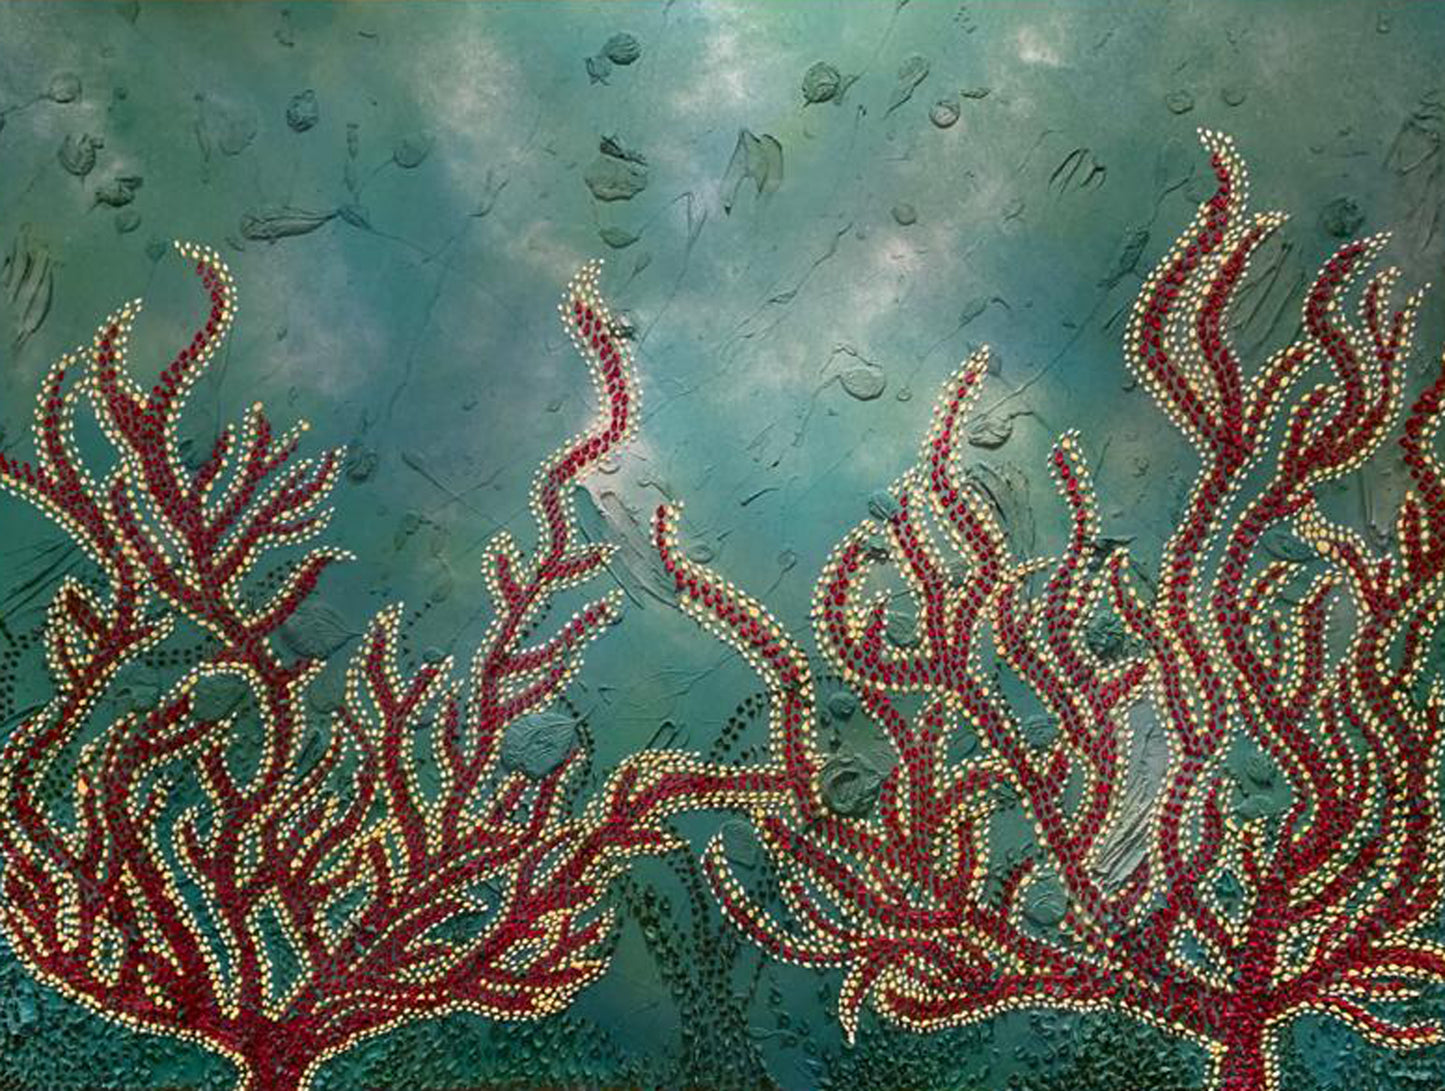 Under-the-Sea-by-Alexandra-Romano-Toronto-Art-Gallery-Textured-Sea-Ocean-Oil-Abstract-Impressionism-Painting